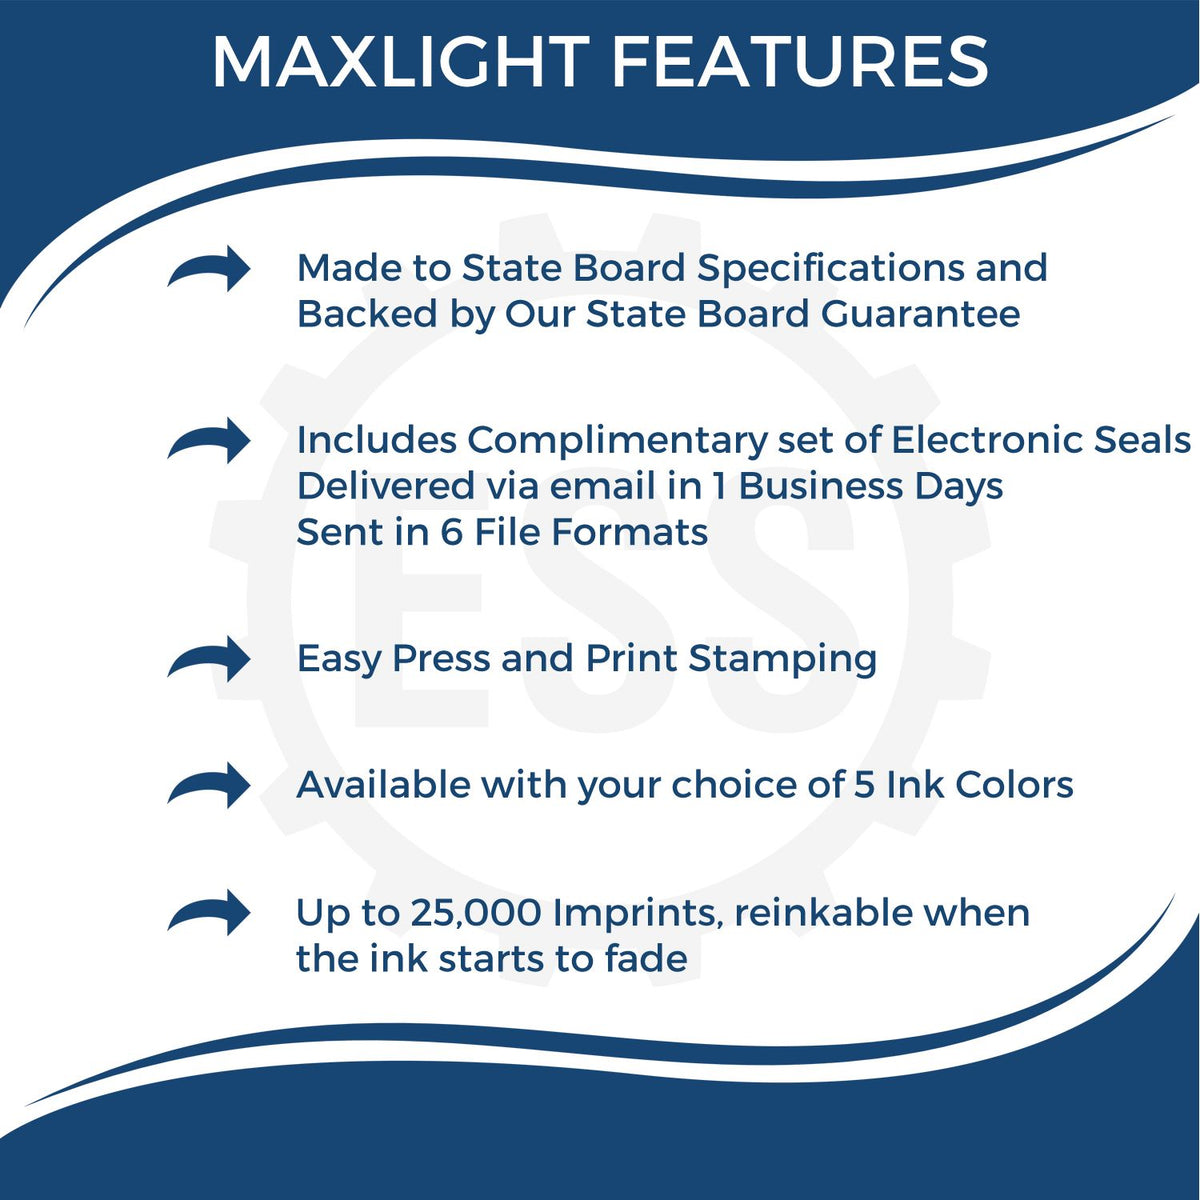 A picture of an infographic highlighting the selling points for the Premium MaxLight Pre-Inked New Mexico Geology Stamp